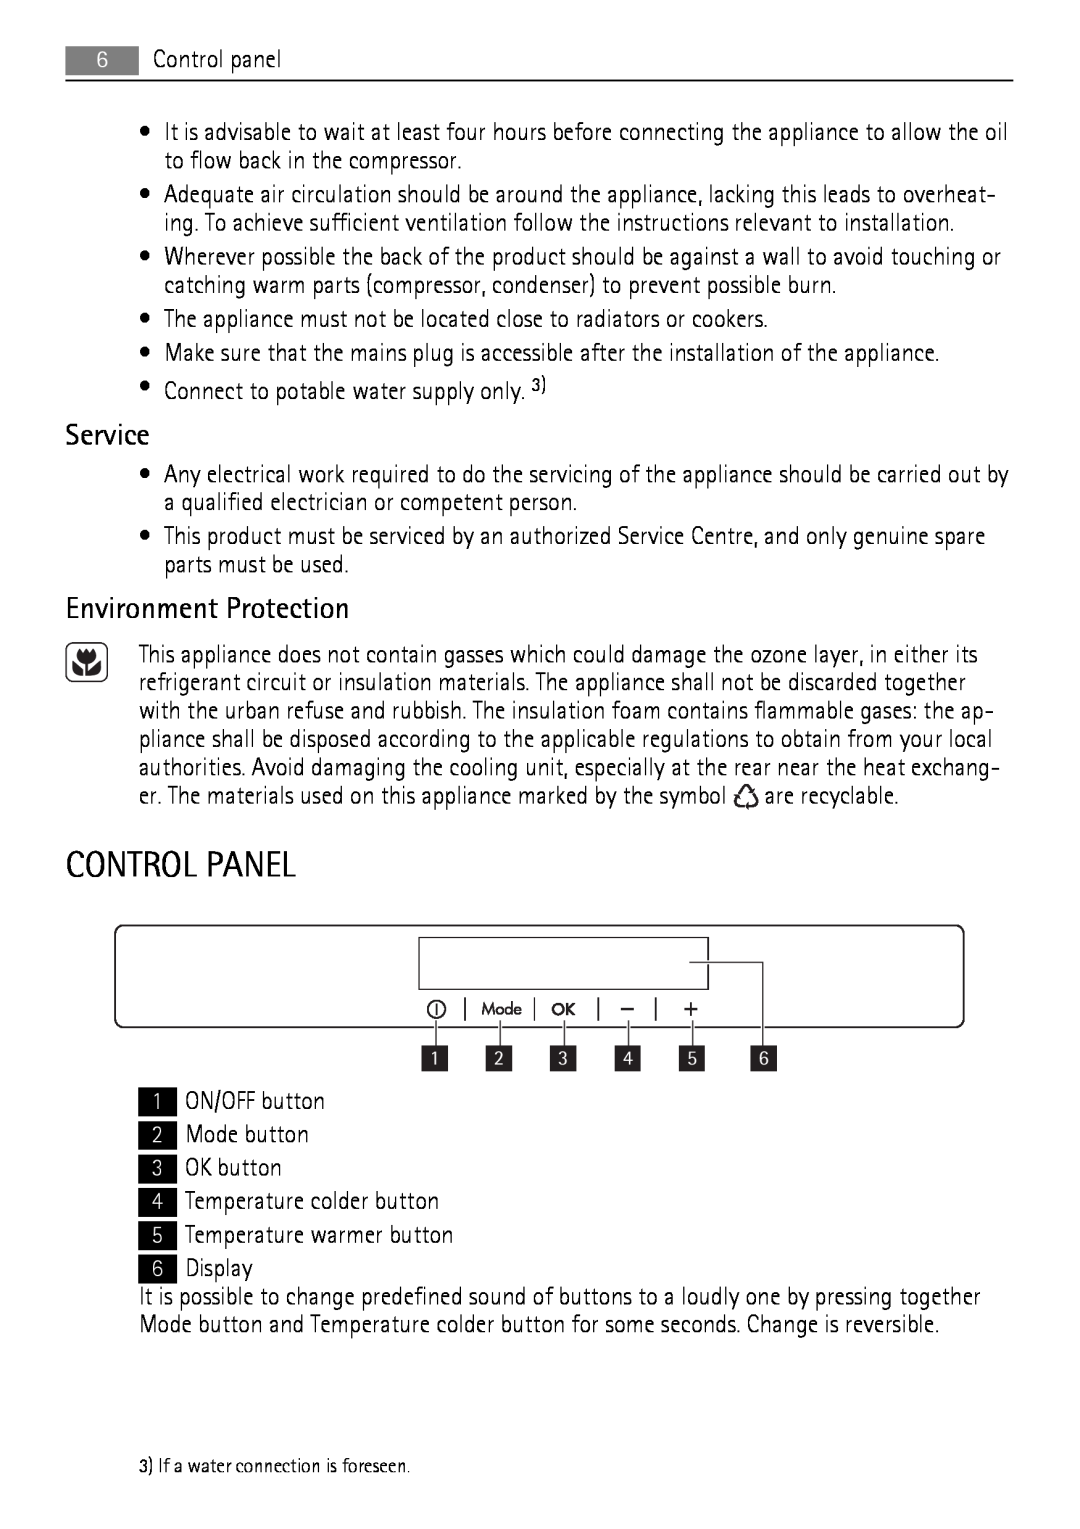 AEG SKS71200F0 user manual Control Panel, Service, Environment Protection 